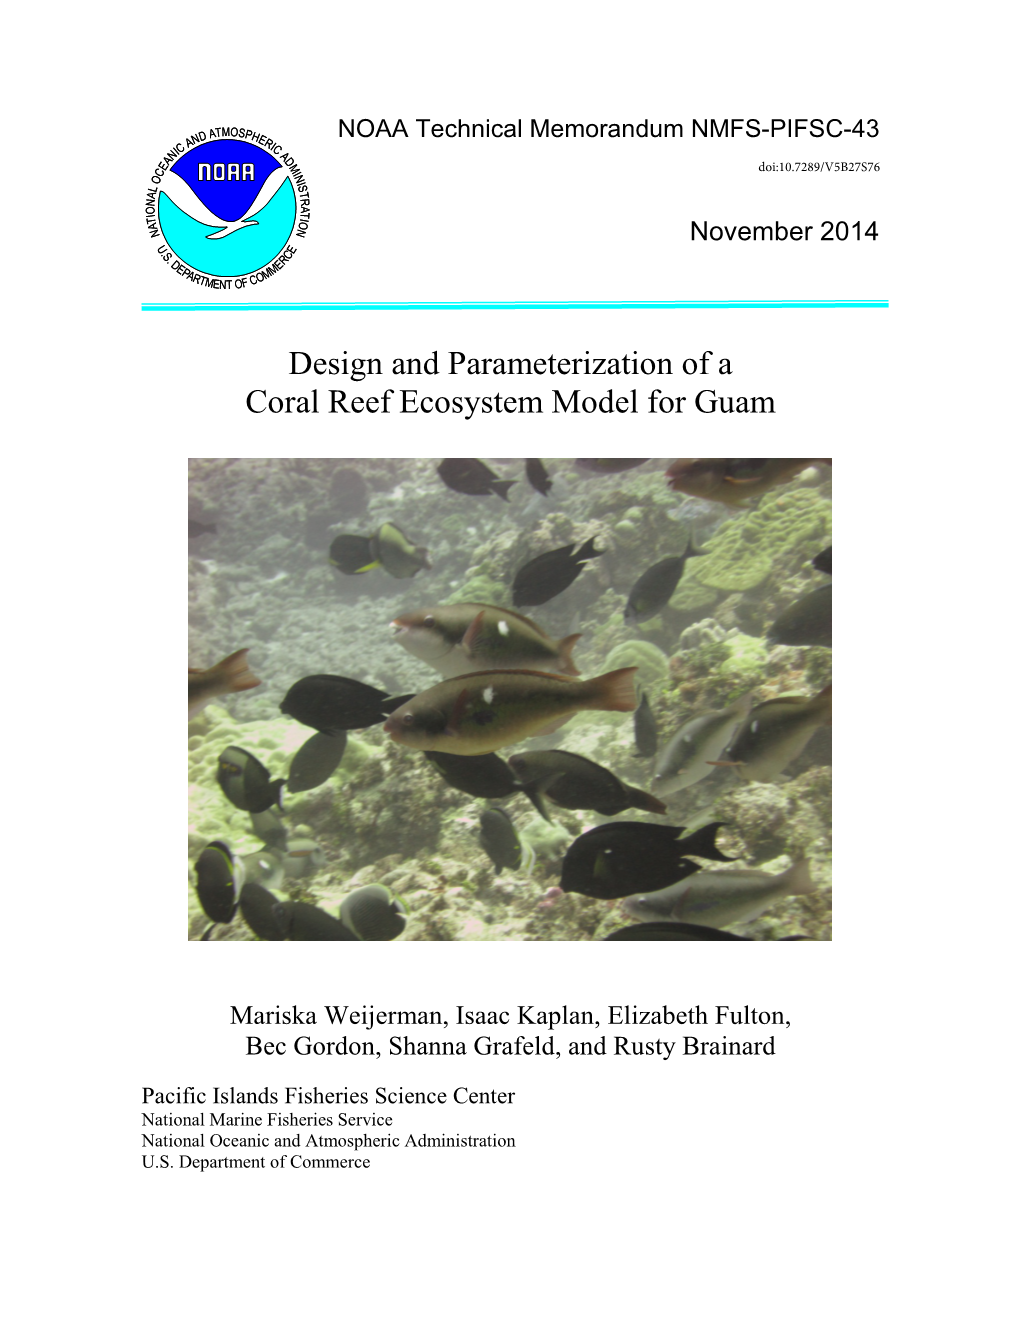 Design and Parameterization of a Coral Reef Ecosystem Model for Guam